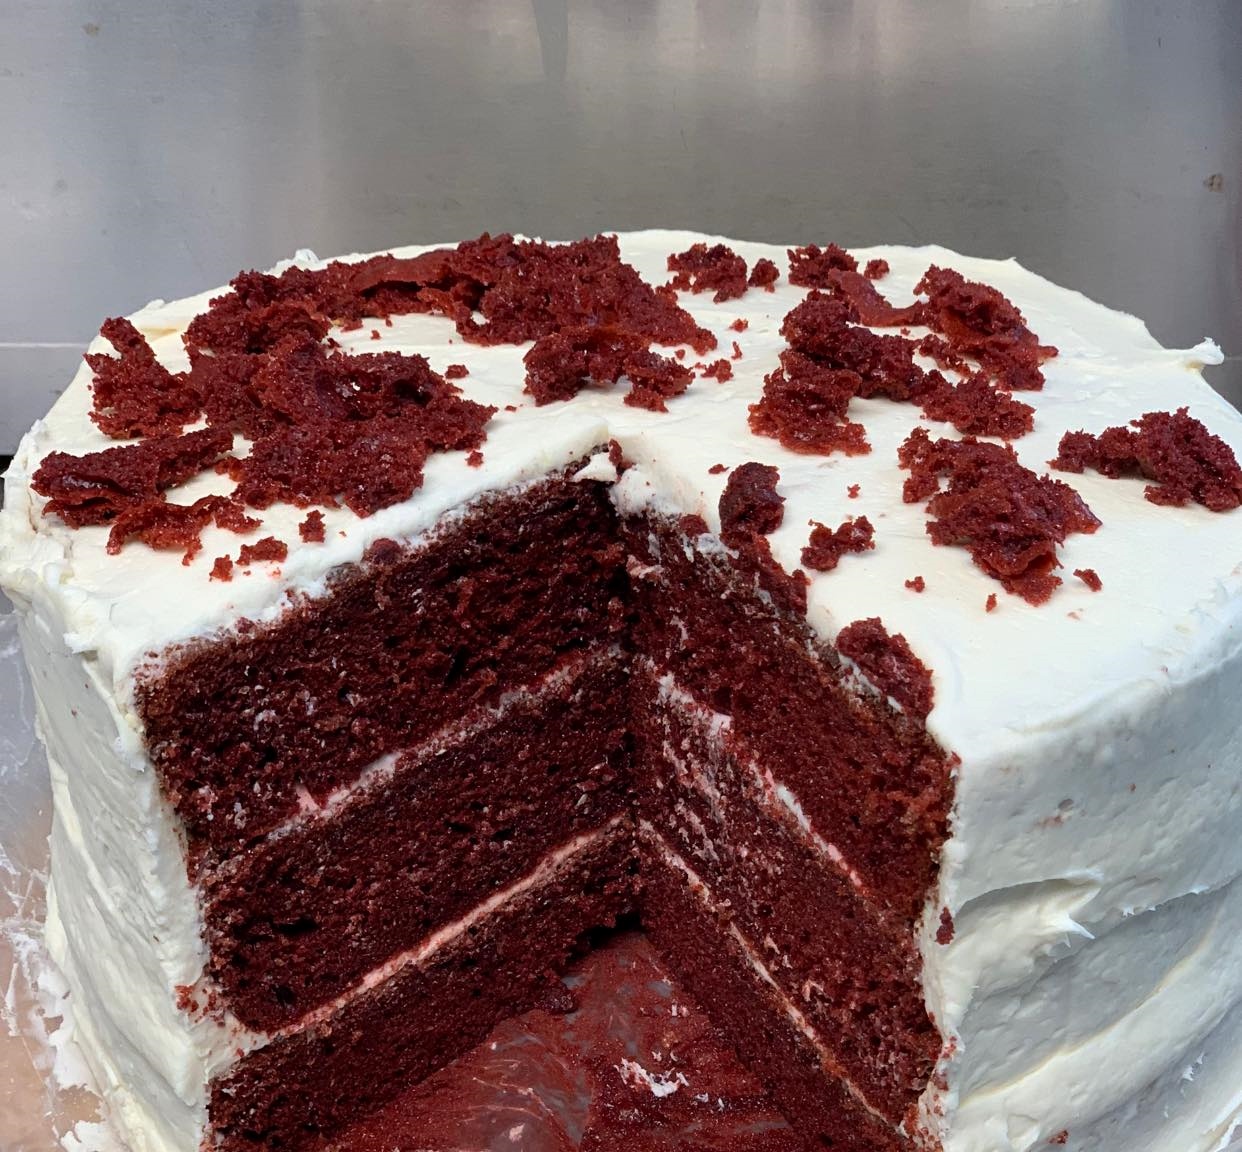 A red velvet cake after a slice has been taken out